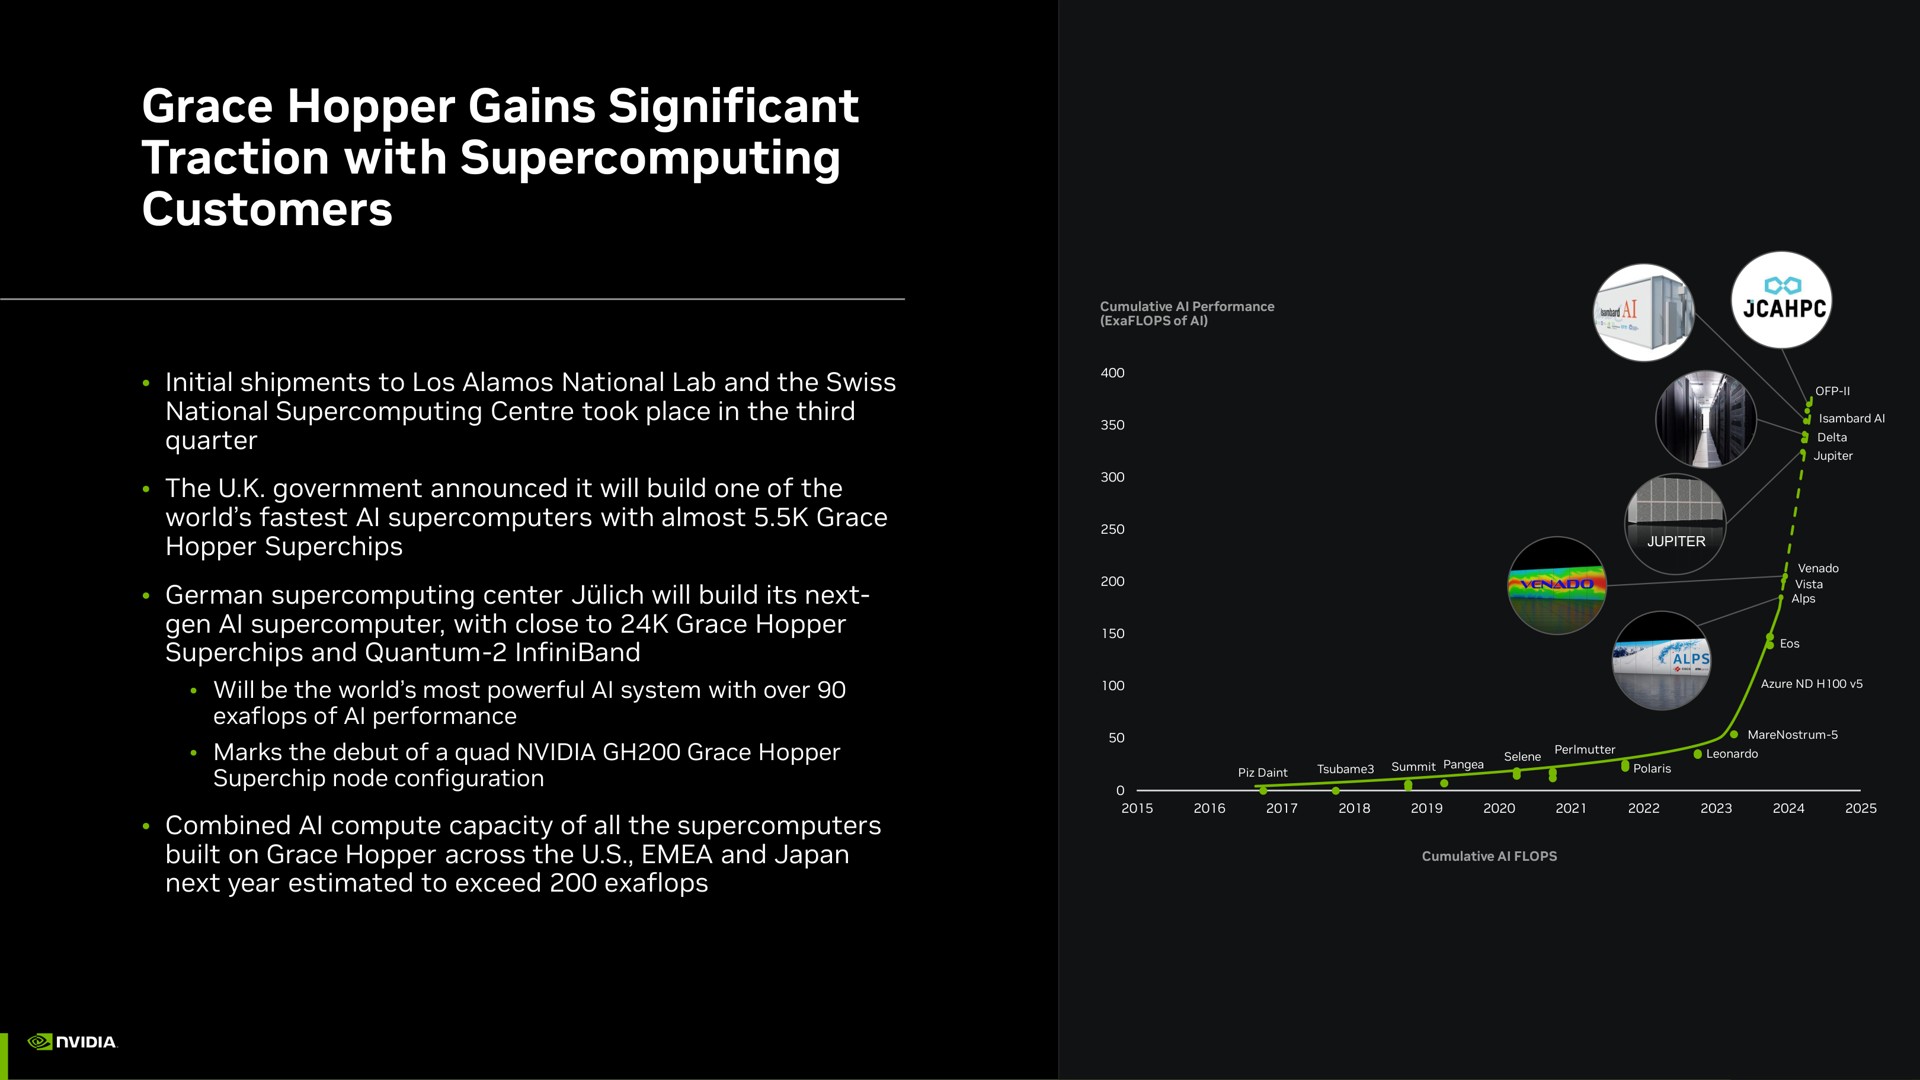 grace hopper gains significant traction with customers quarter | NVIDIA